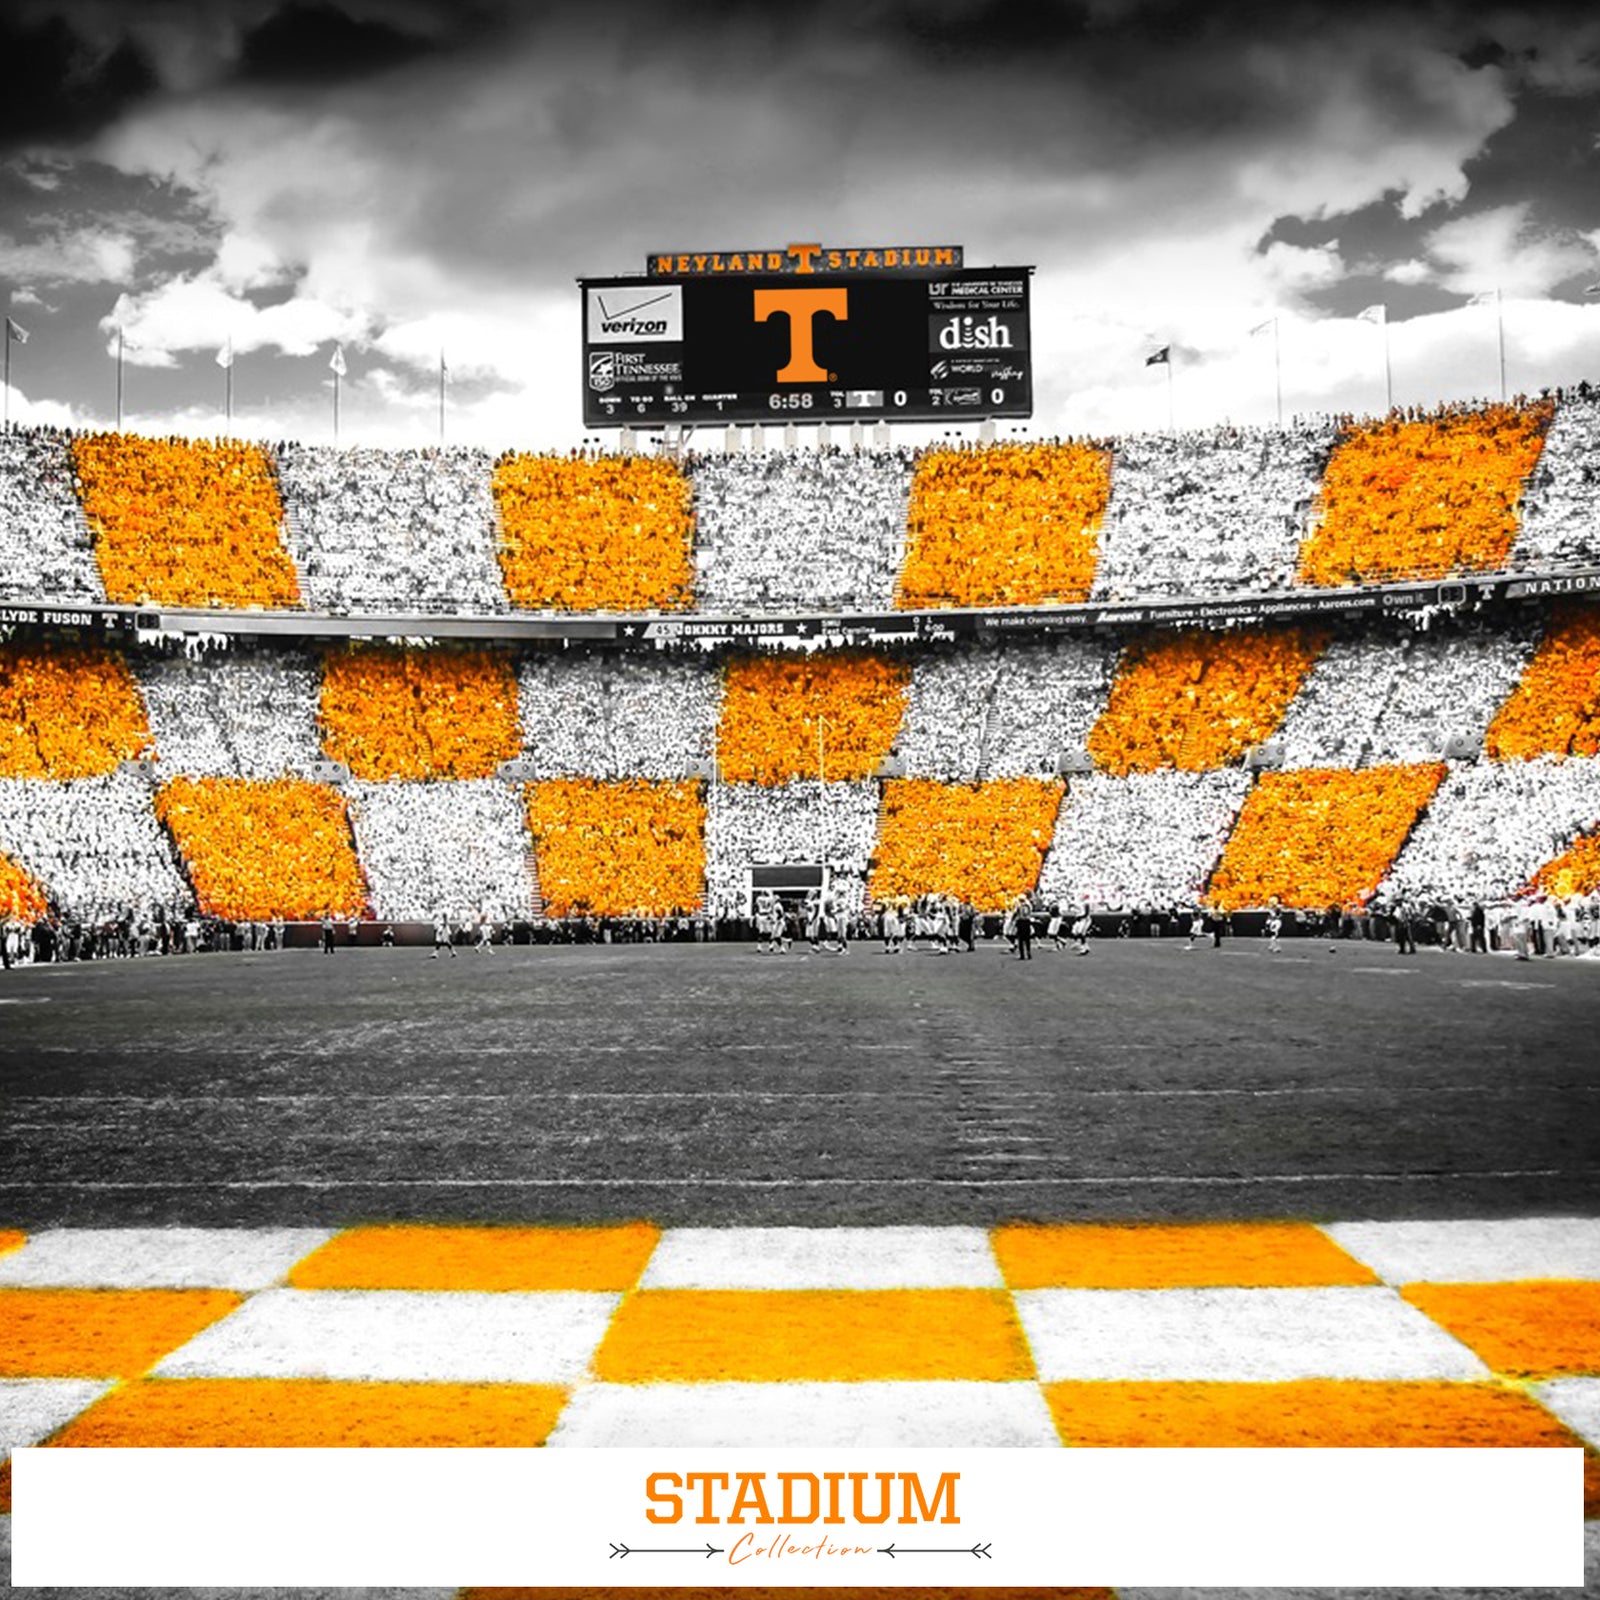 Tennessee Camo wallpaper by firedan31  Download on ZEDGE  2f4f